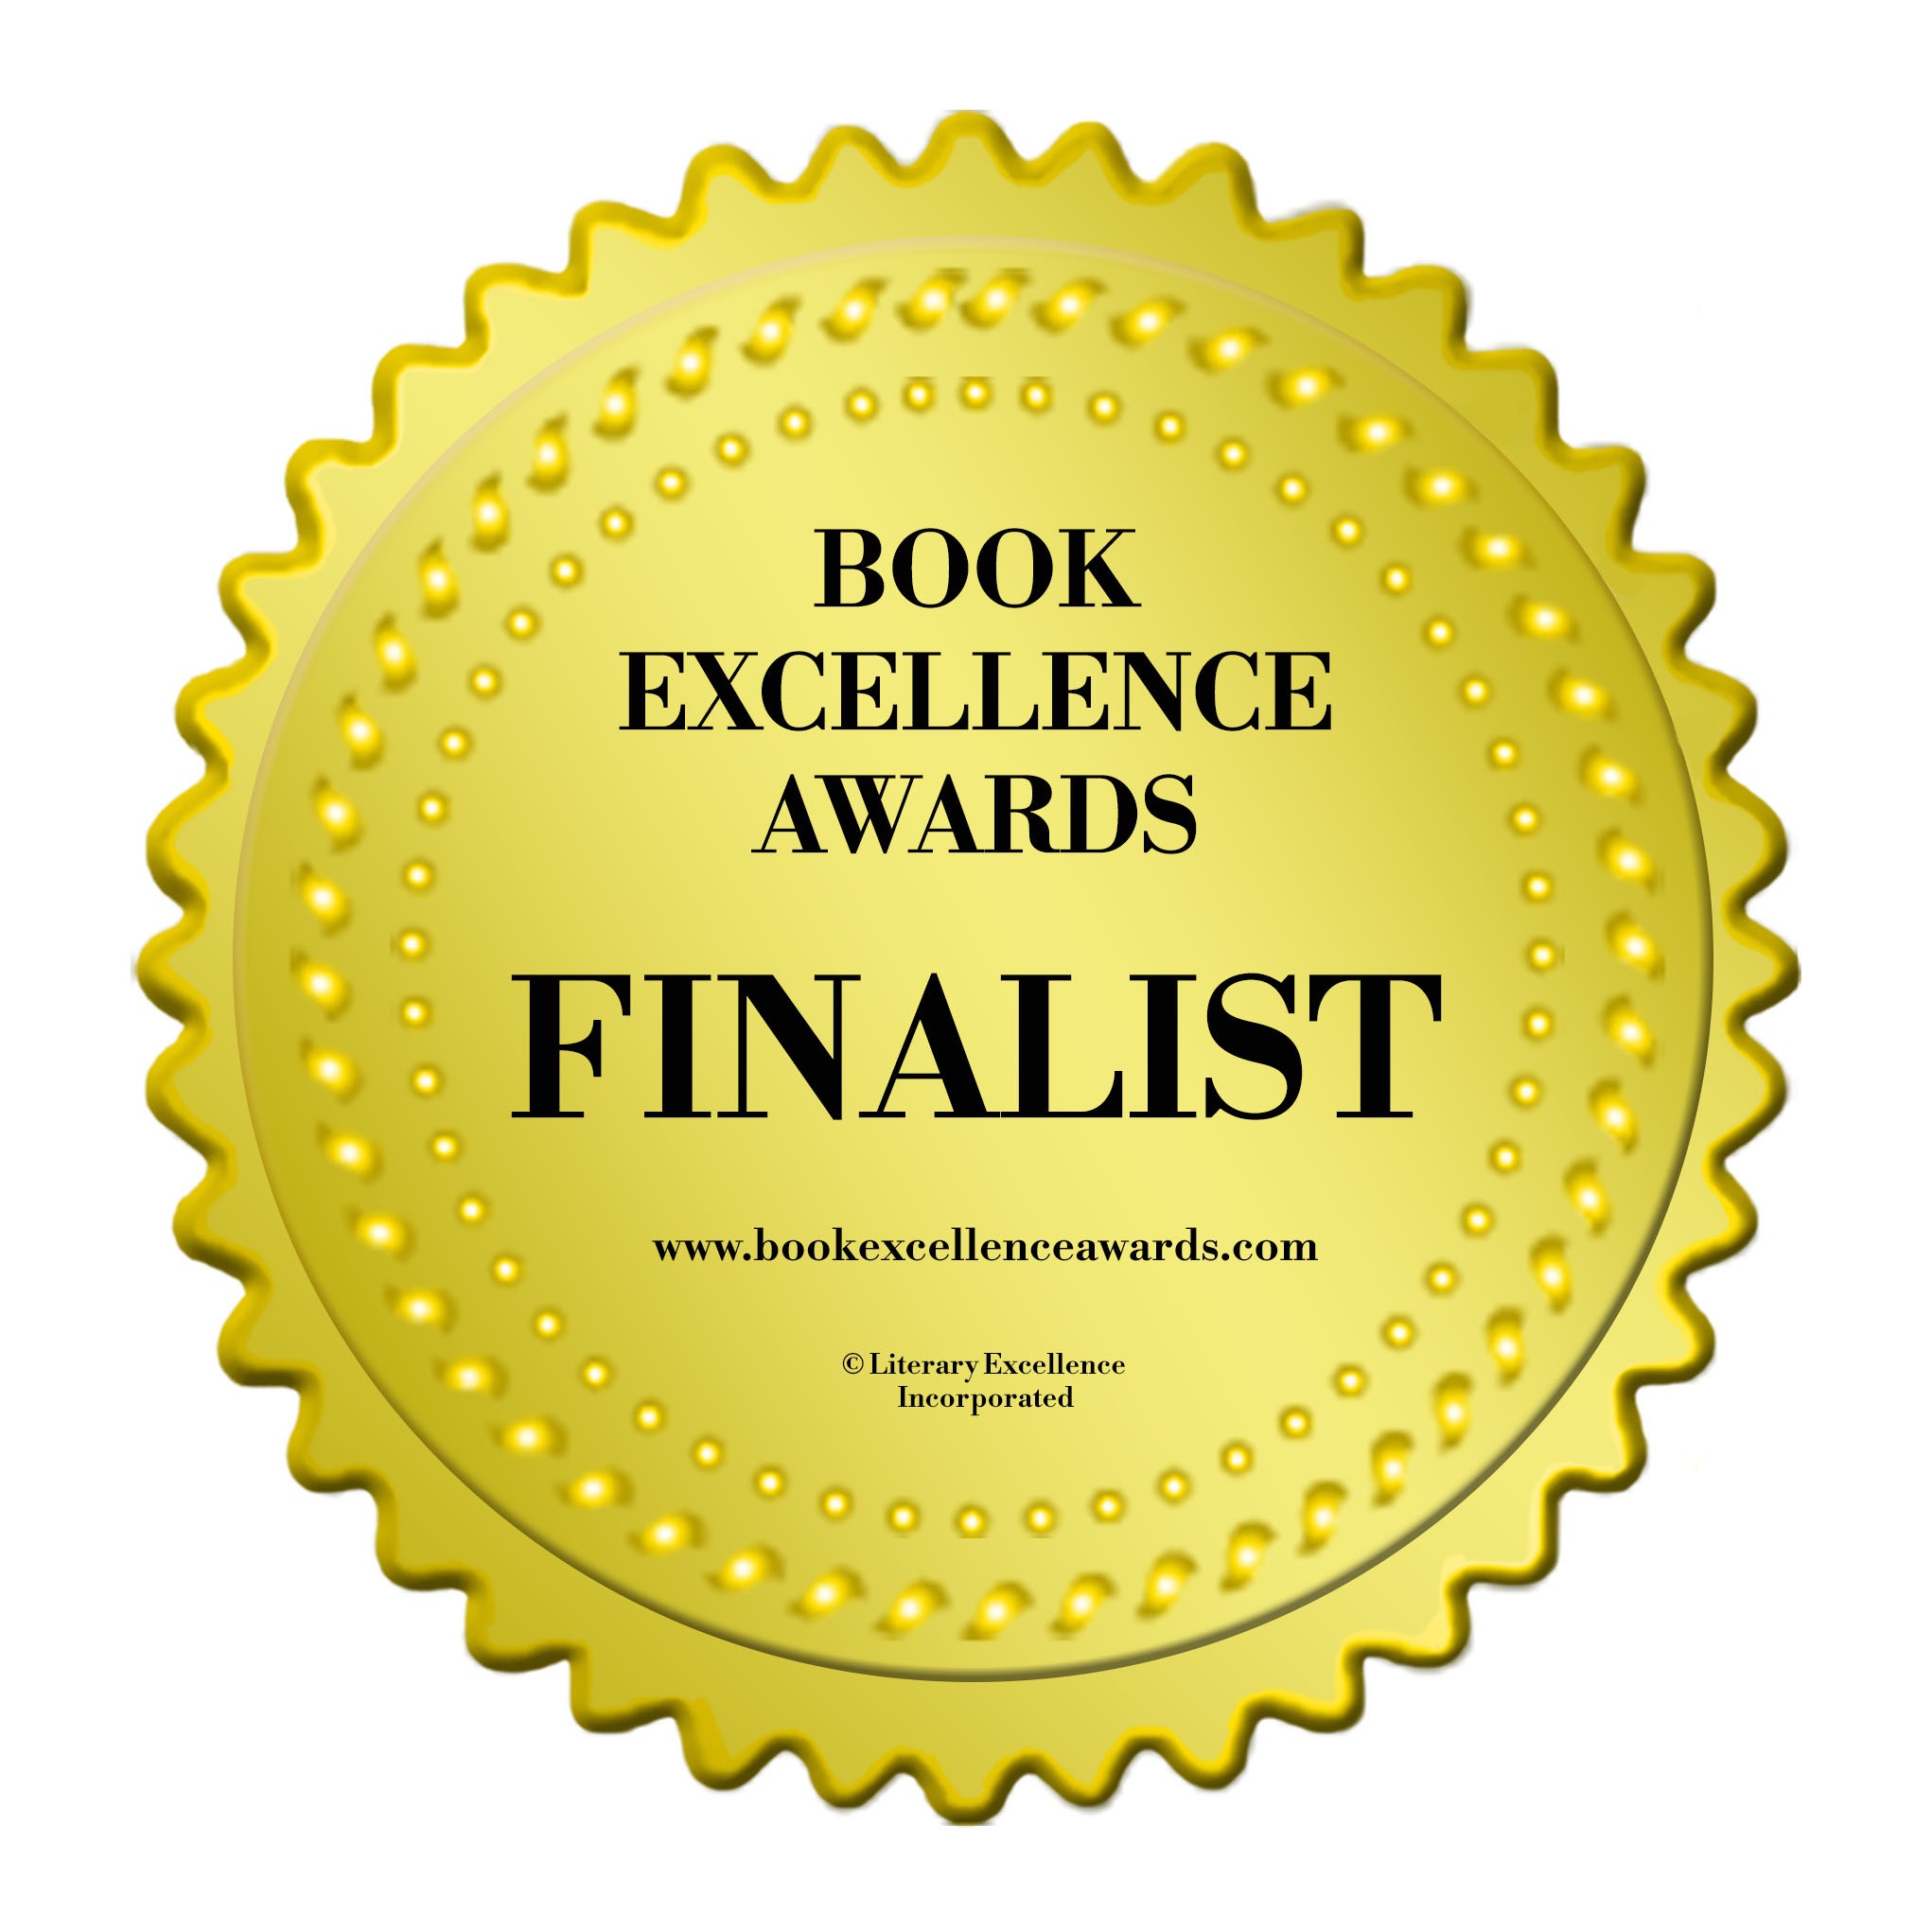 A Course in Deception is a Book Excellence Awards Finalist